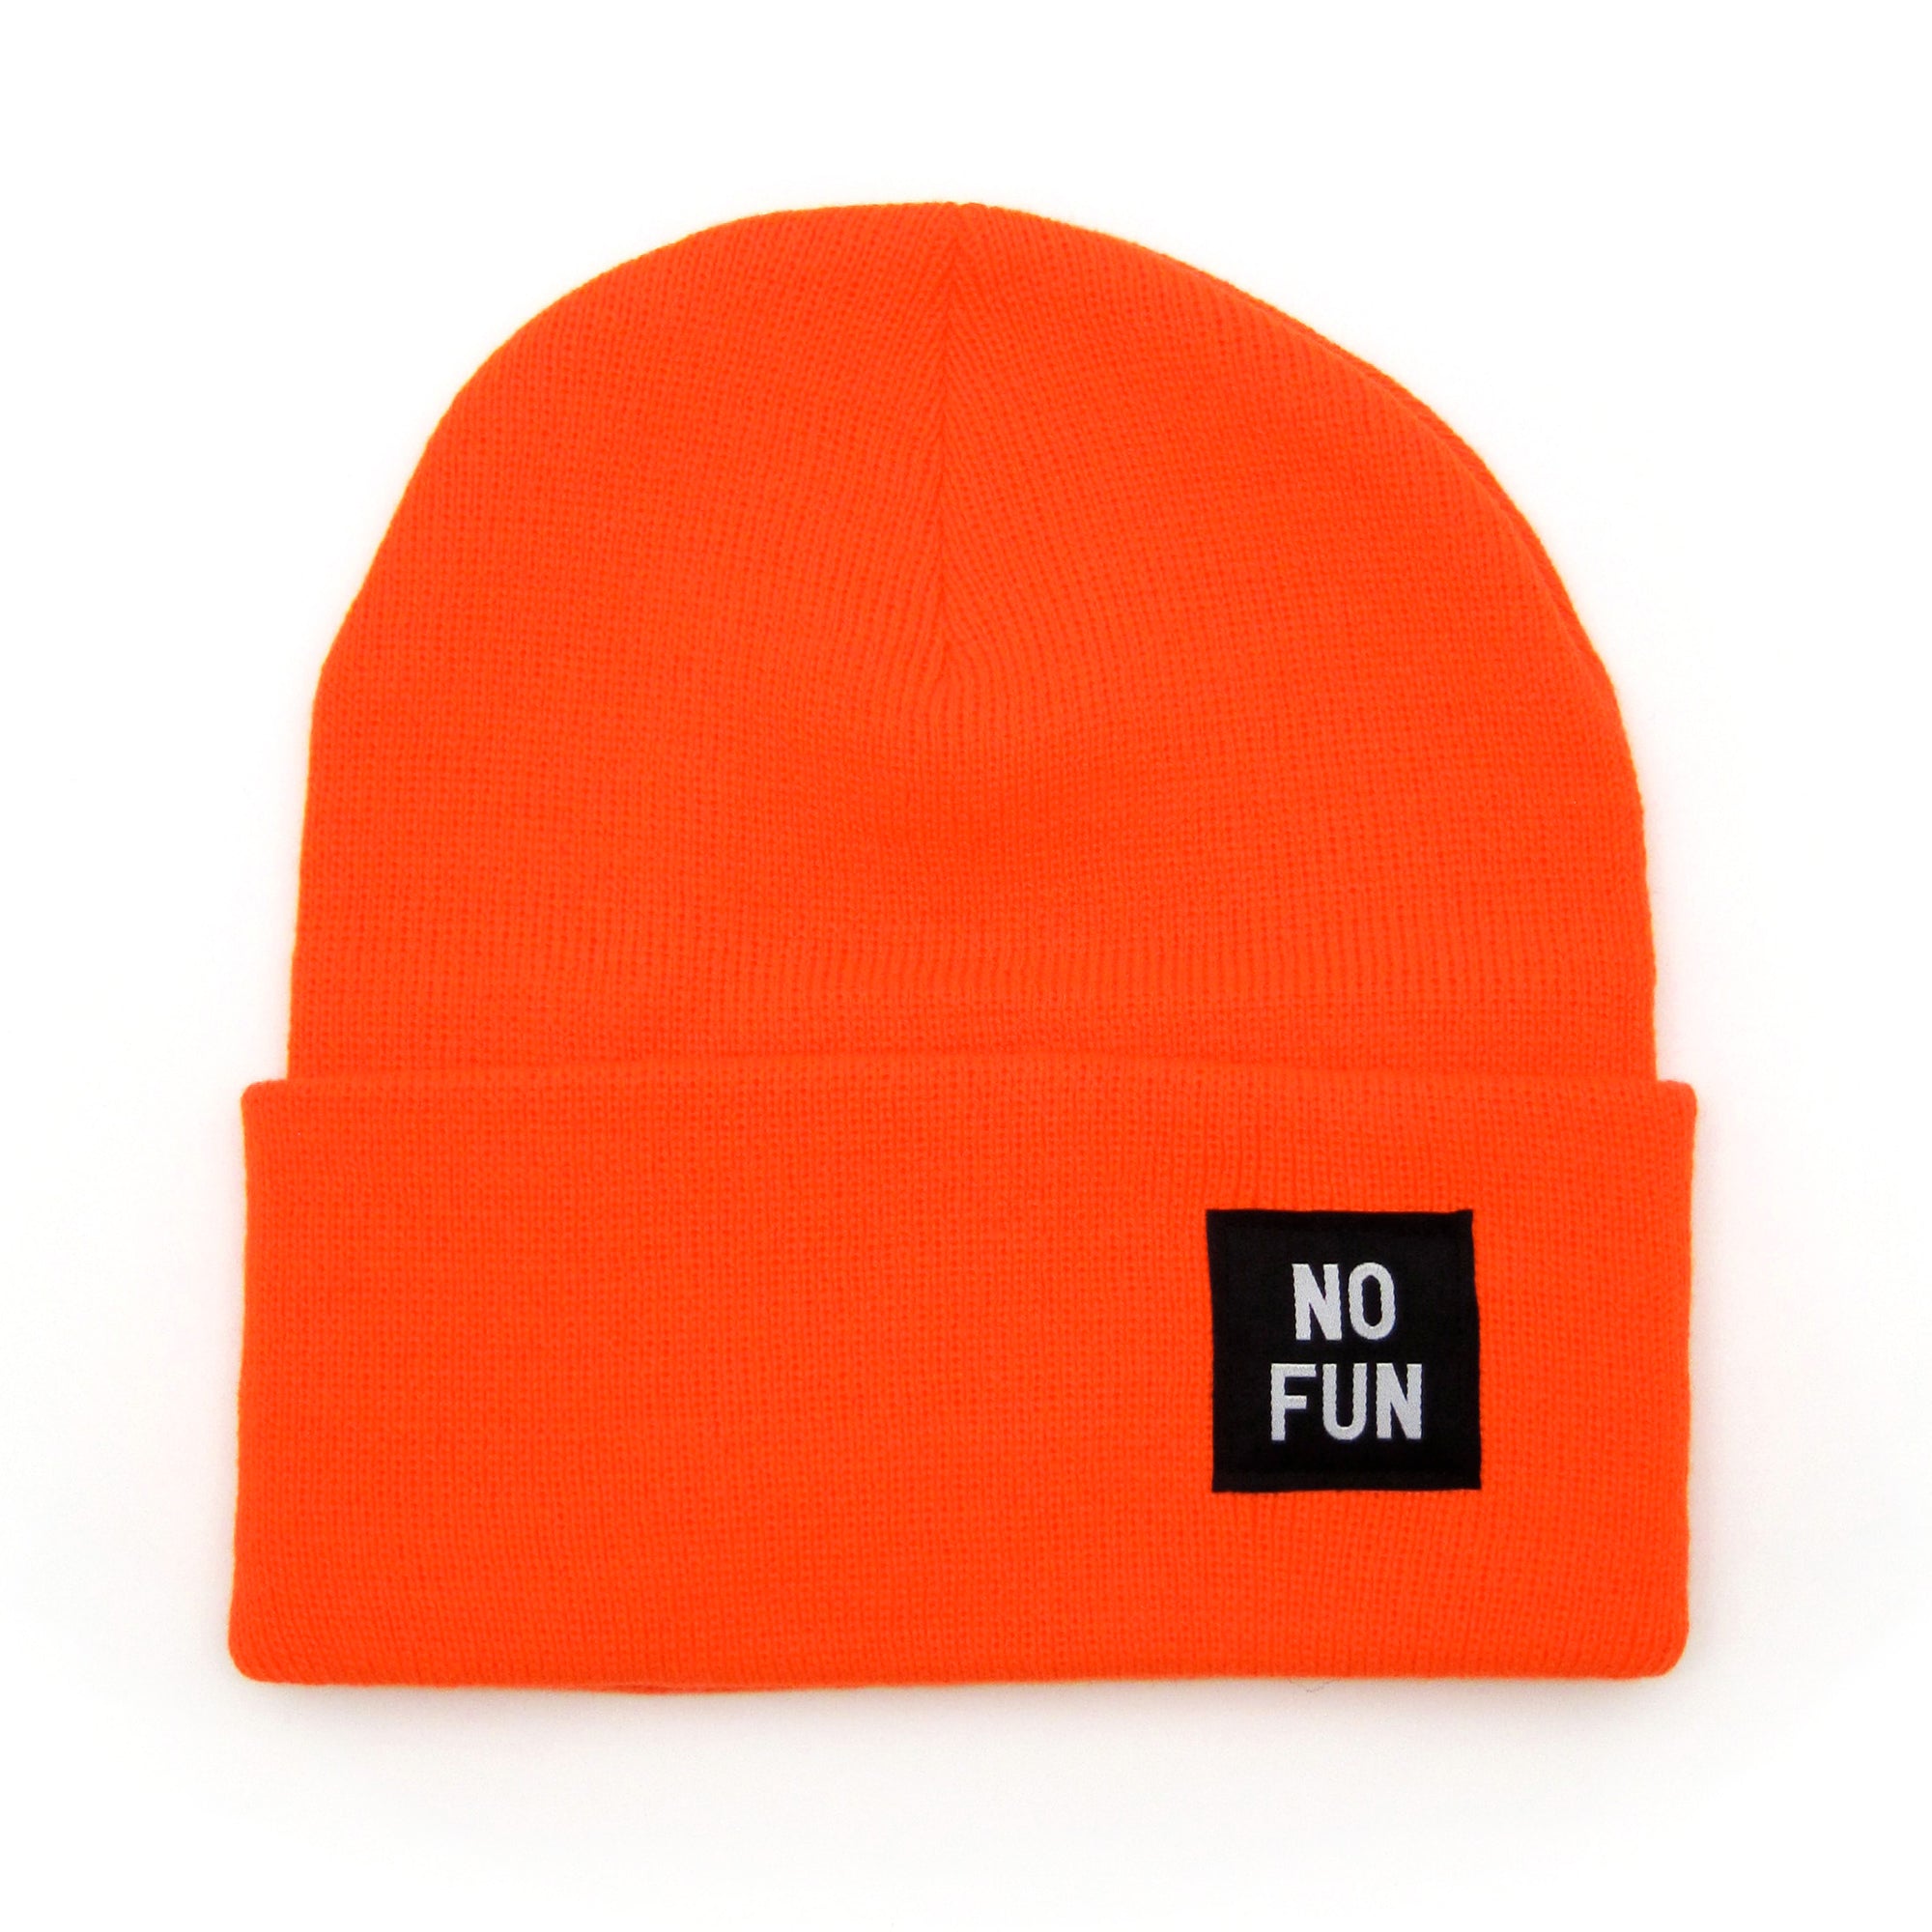 The classic "No Fun" labelled beanie in orange. There is a small, black, woven label that reads "No Fun®" on the cuff.